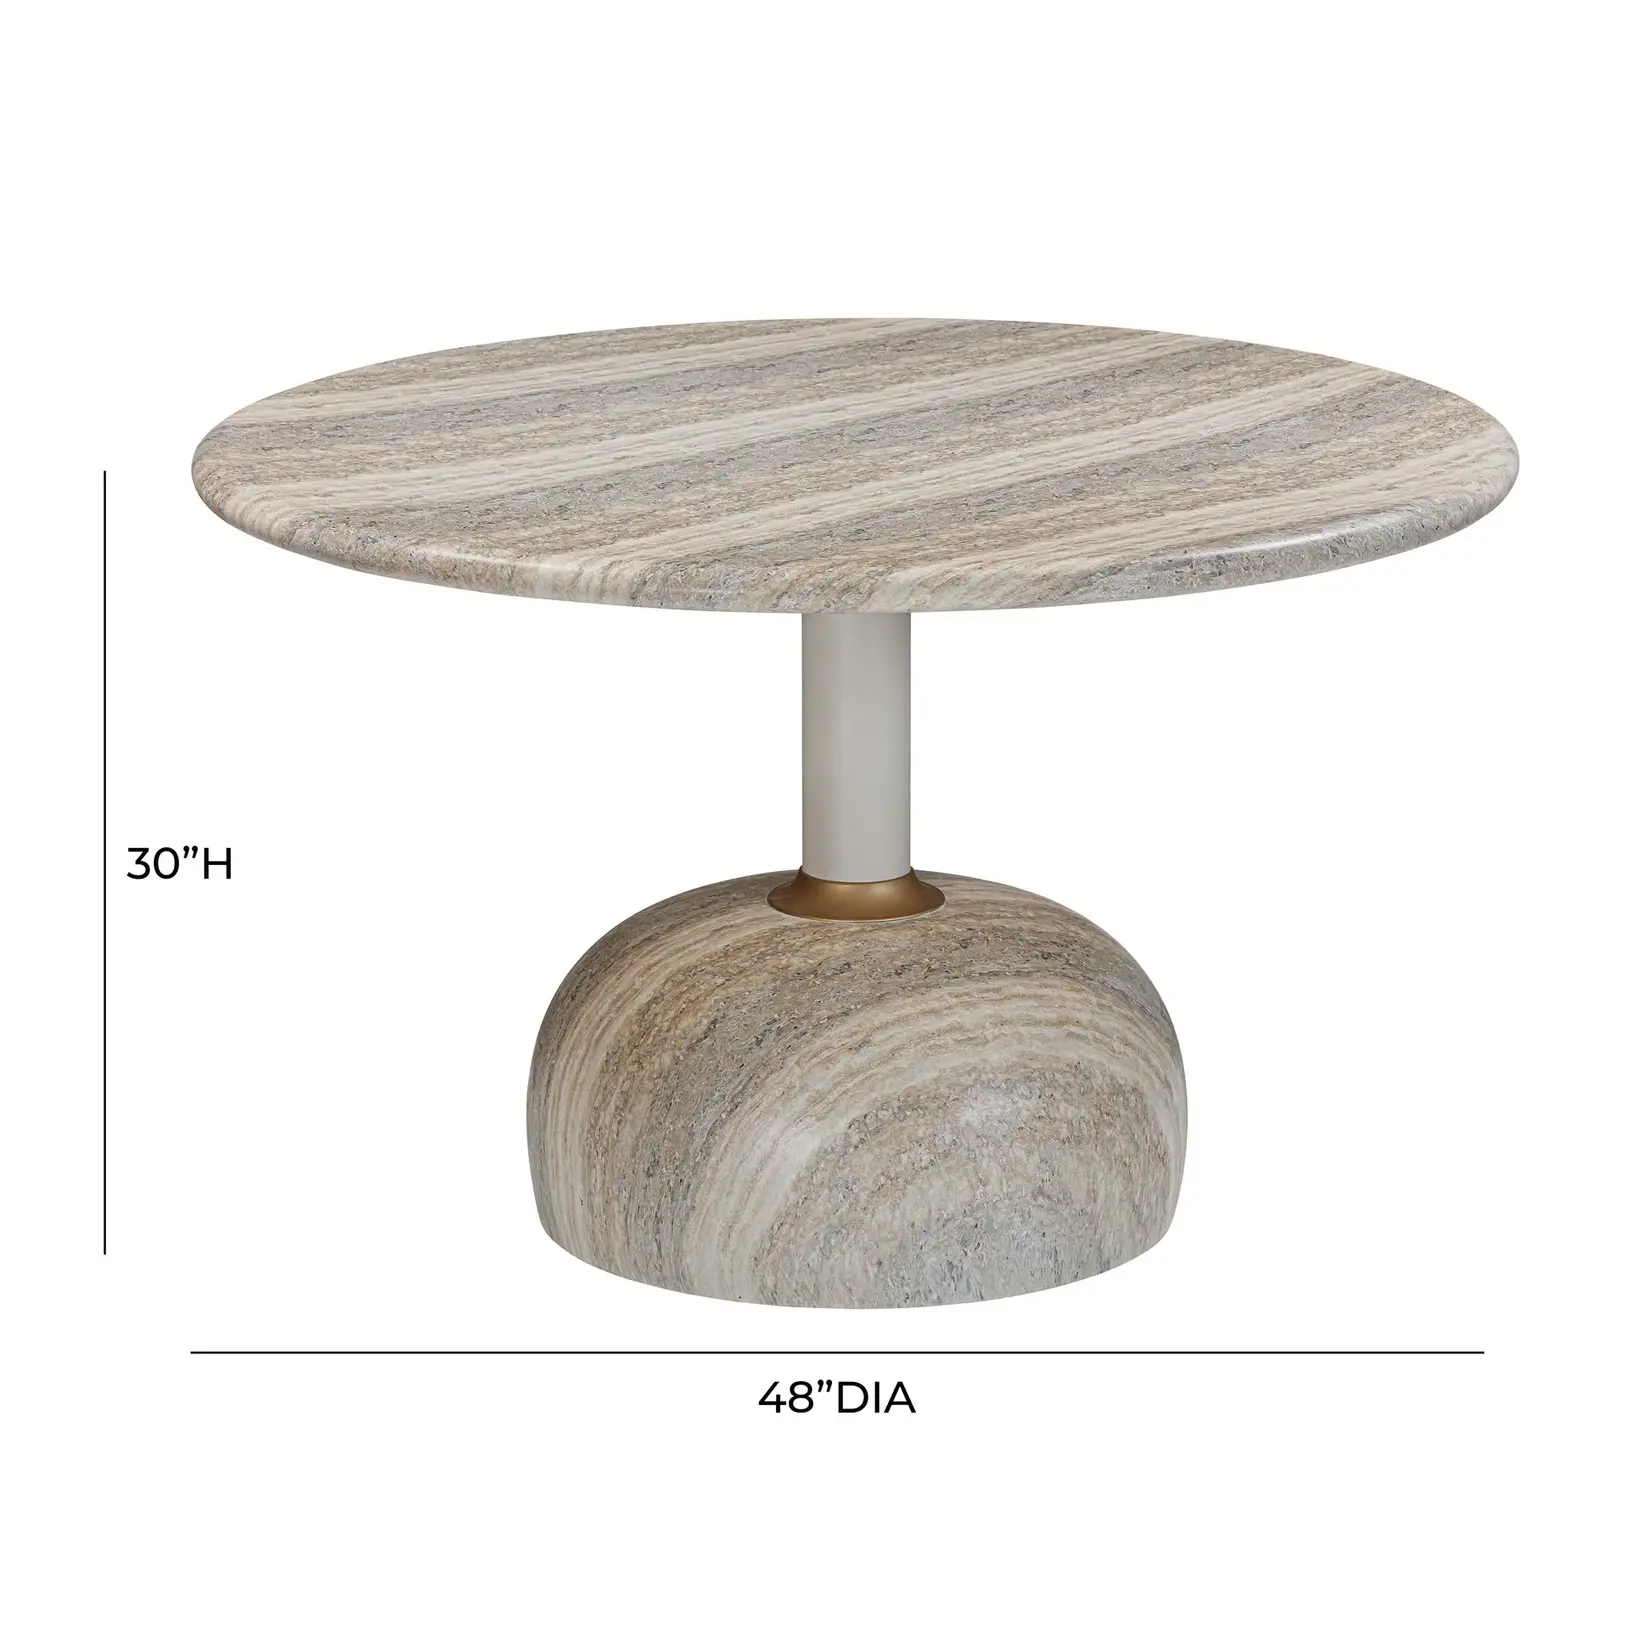 Tov Ana Concrete Faux Travertine Indoor / Outdoor 48" Round Dining Table